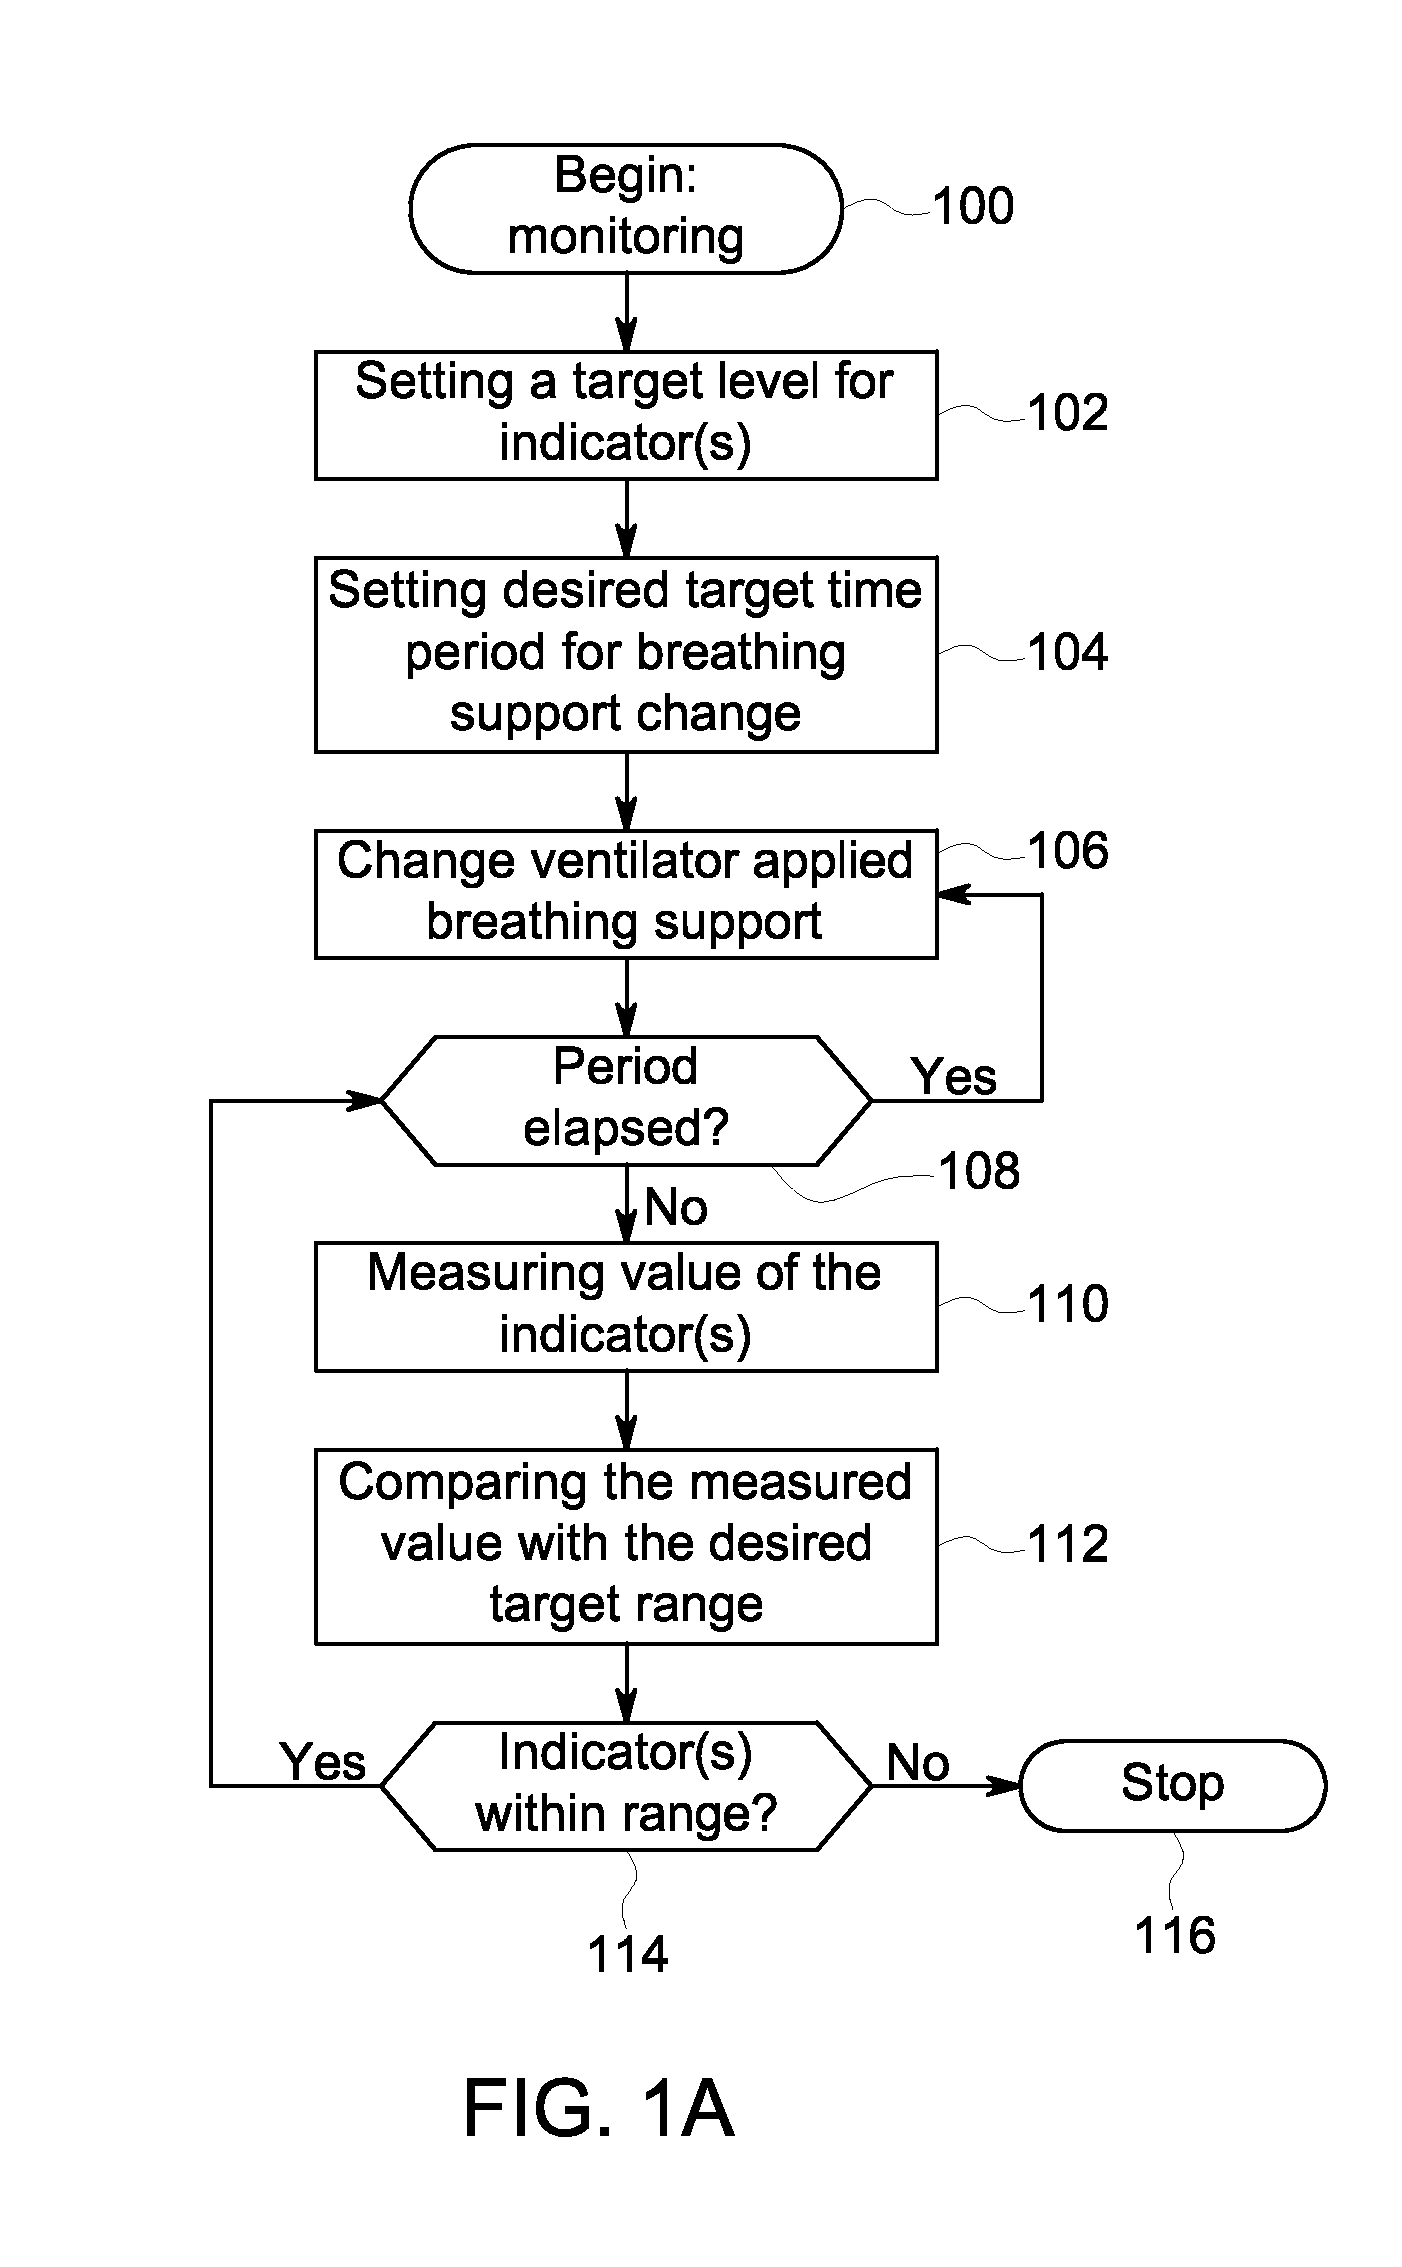 Method and system for monitoring patient's breathing action response to changes in a ventilator applied breathing support